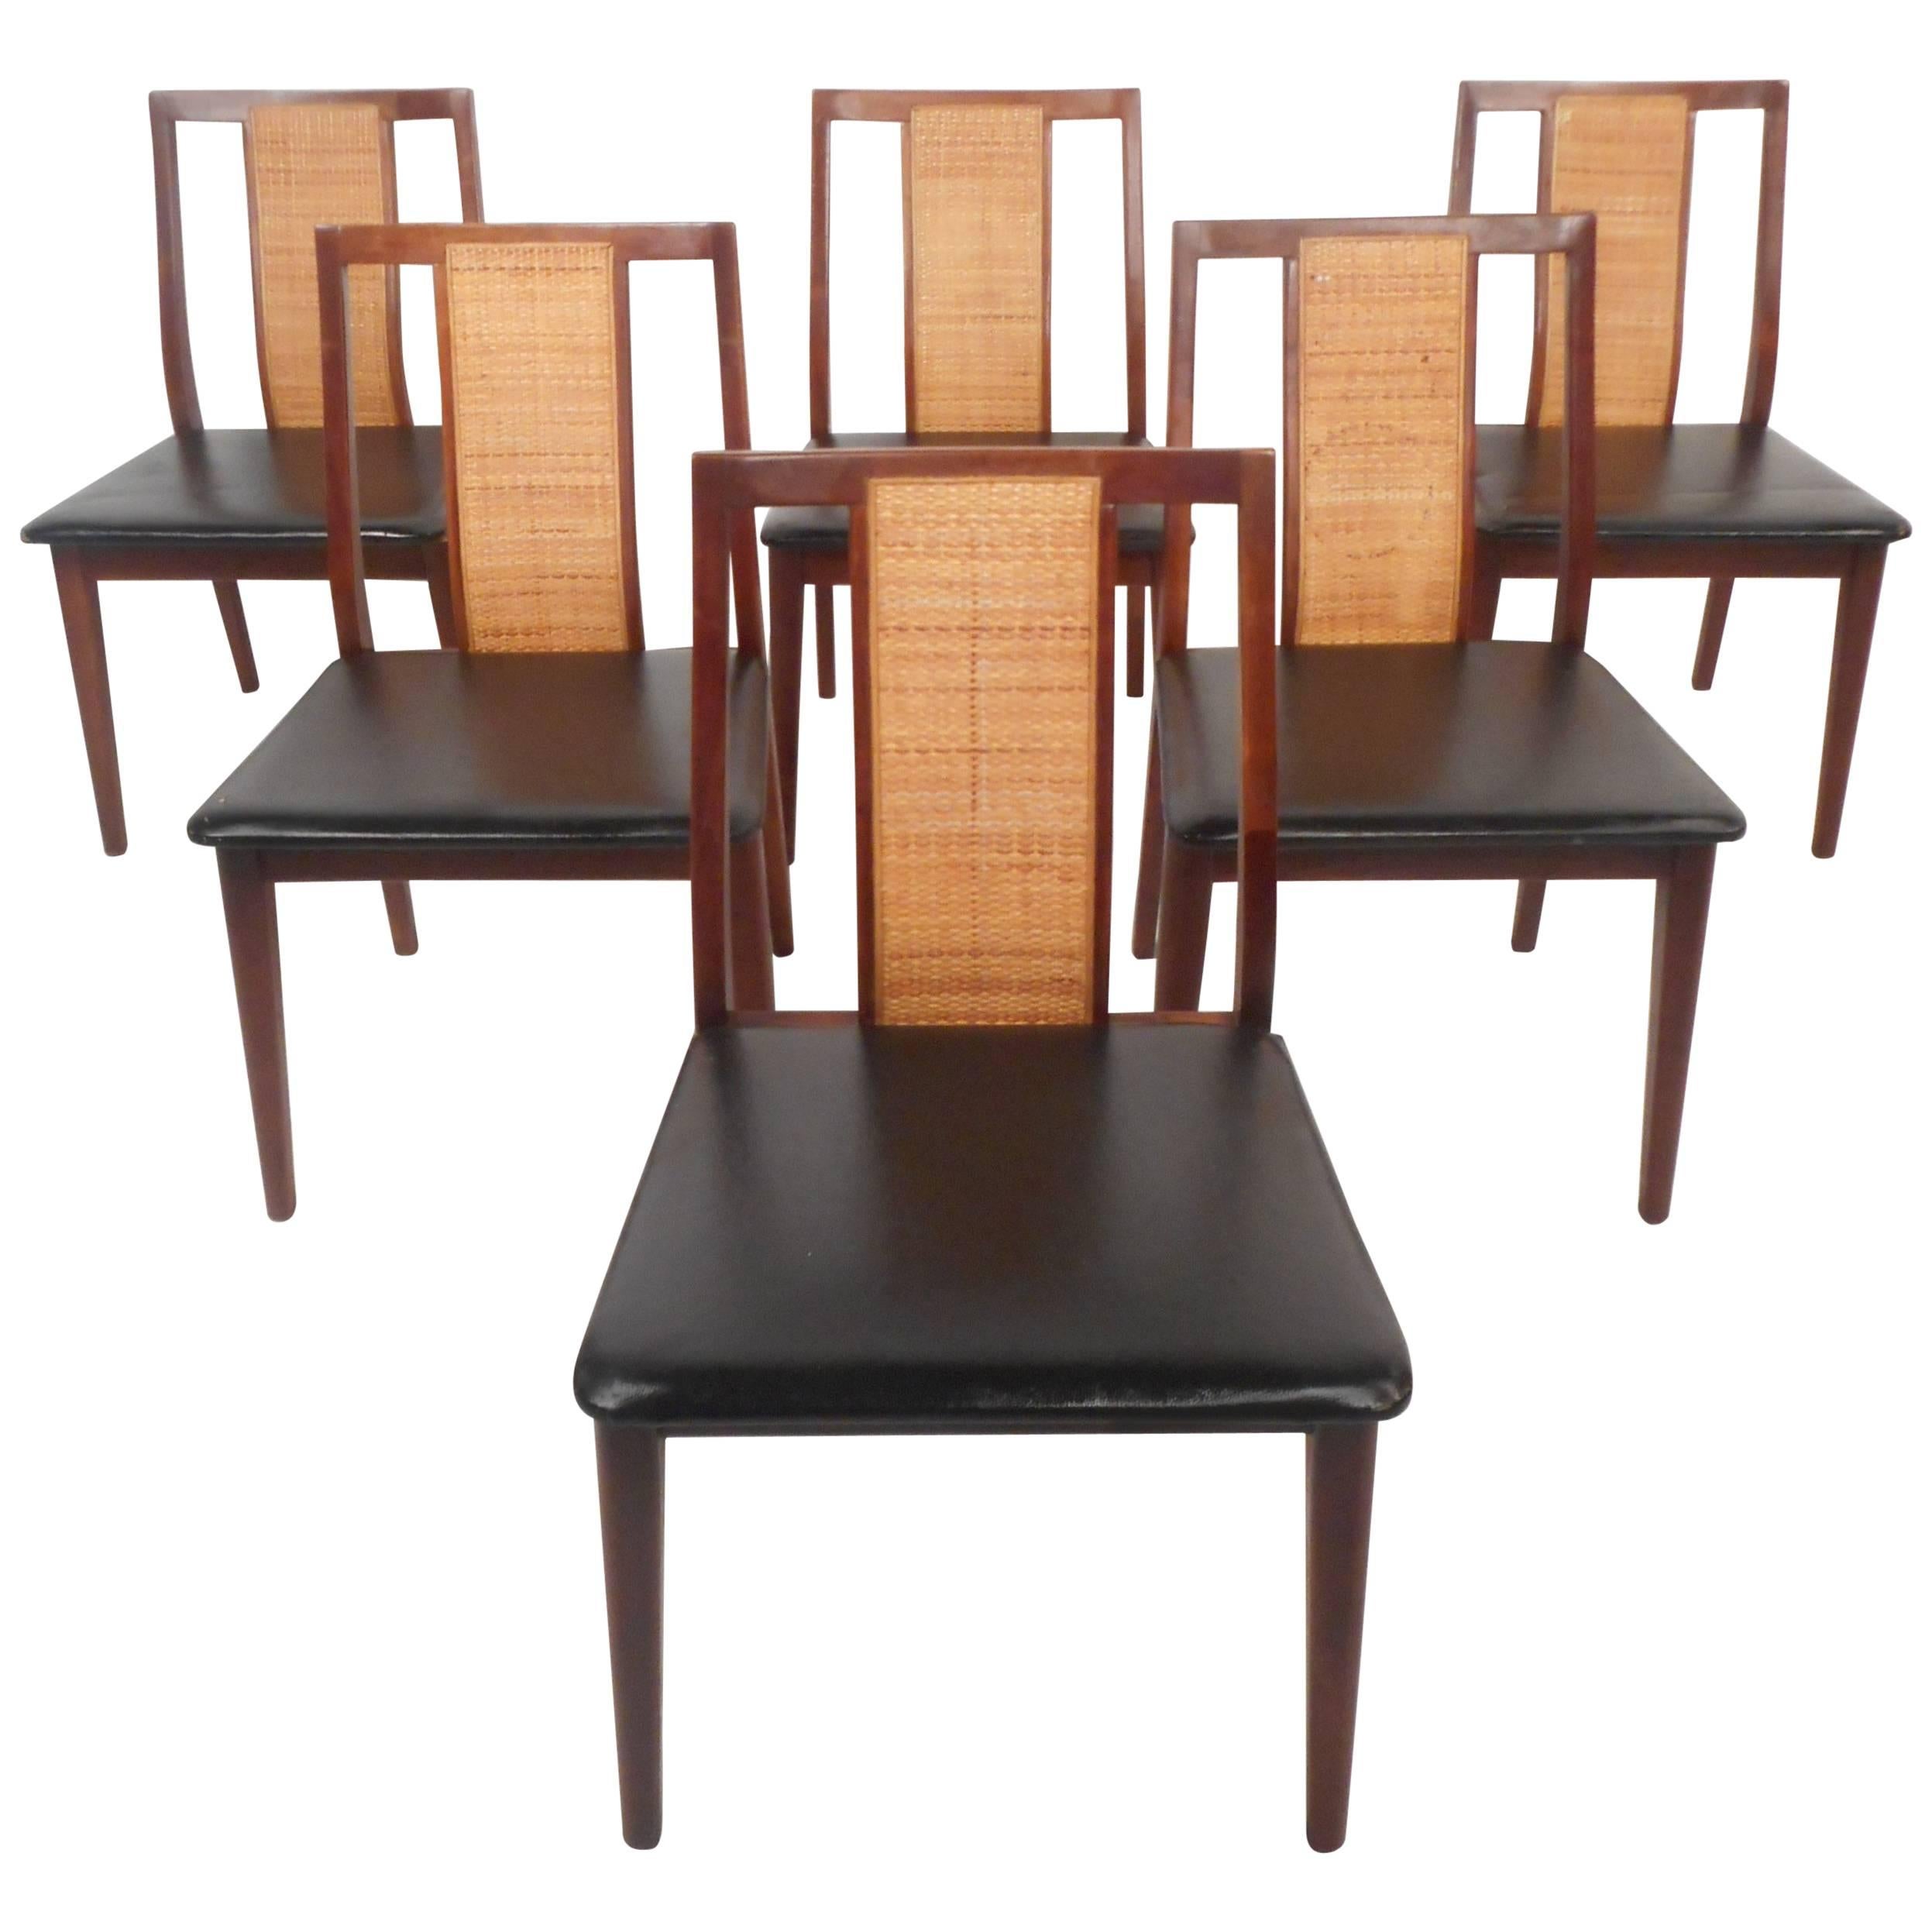 Set of Six Mid-Century Modern Dining Chairs in the Style of Edward Wormley